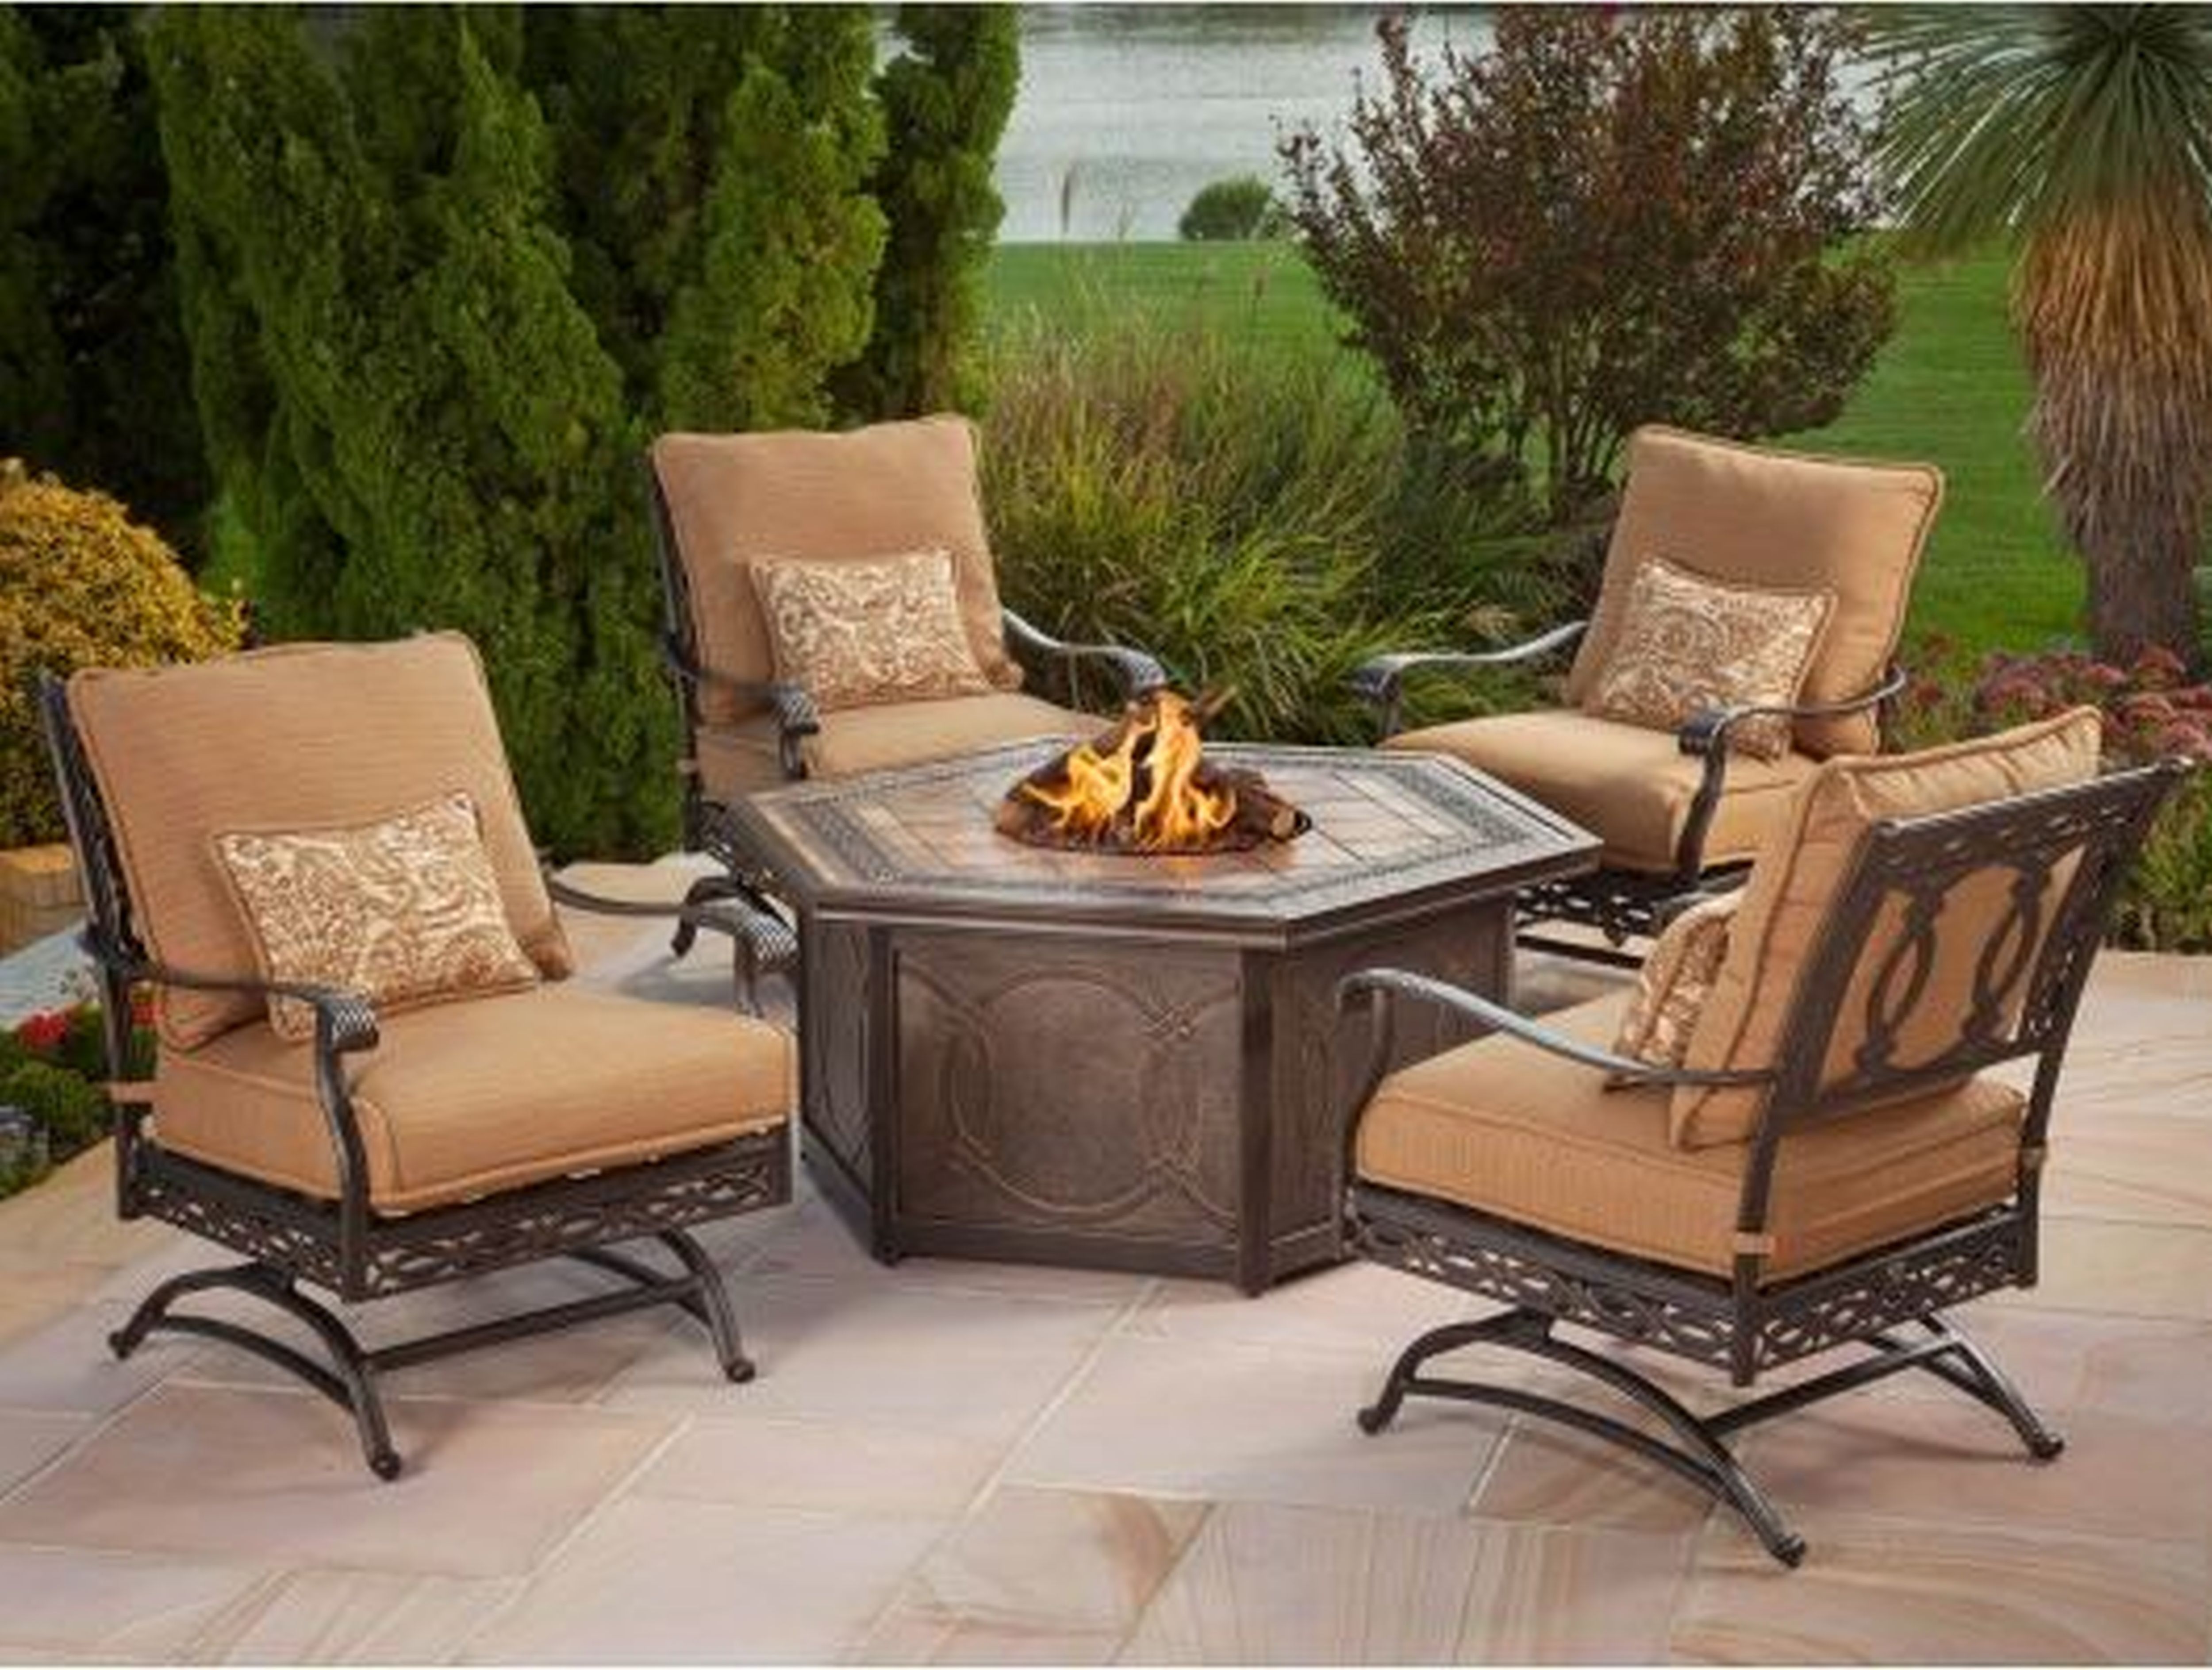 clearance patio furniture sets ... patio, patio set clearance home depot patio furniture clearance patio VLOMMJP